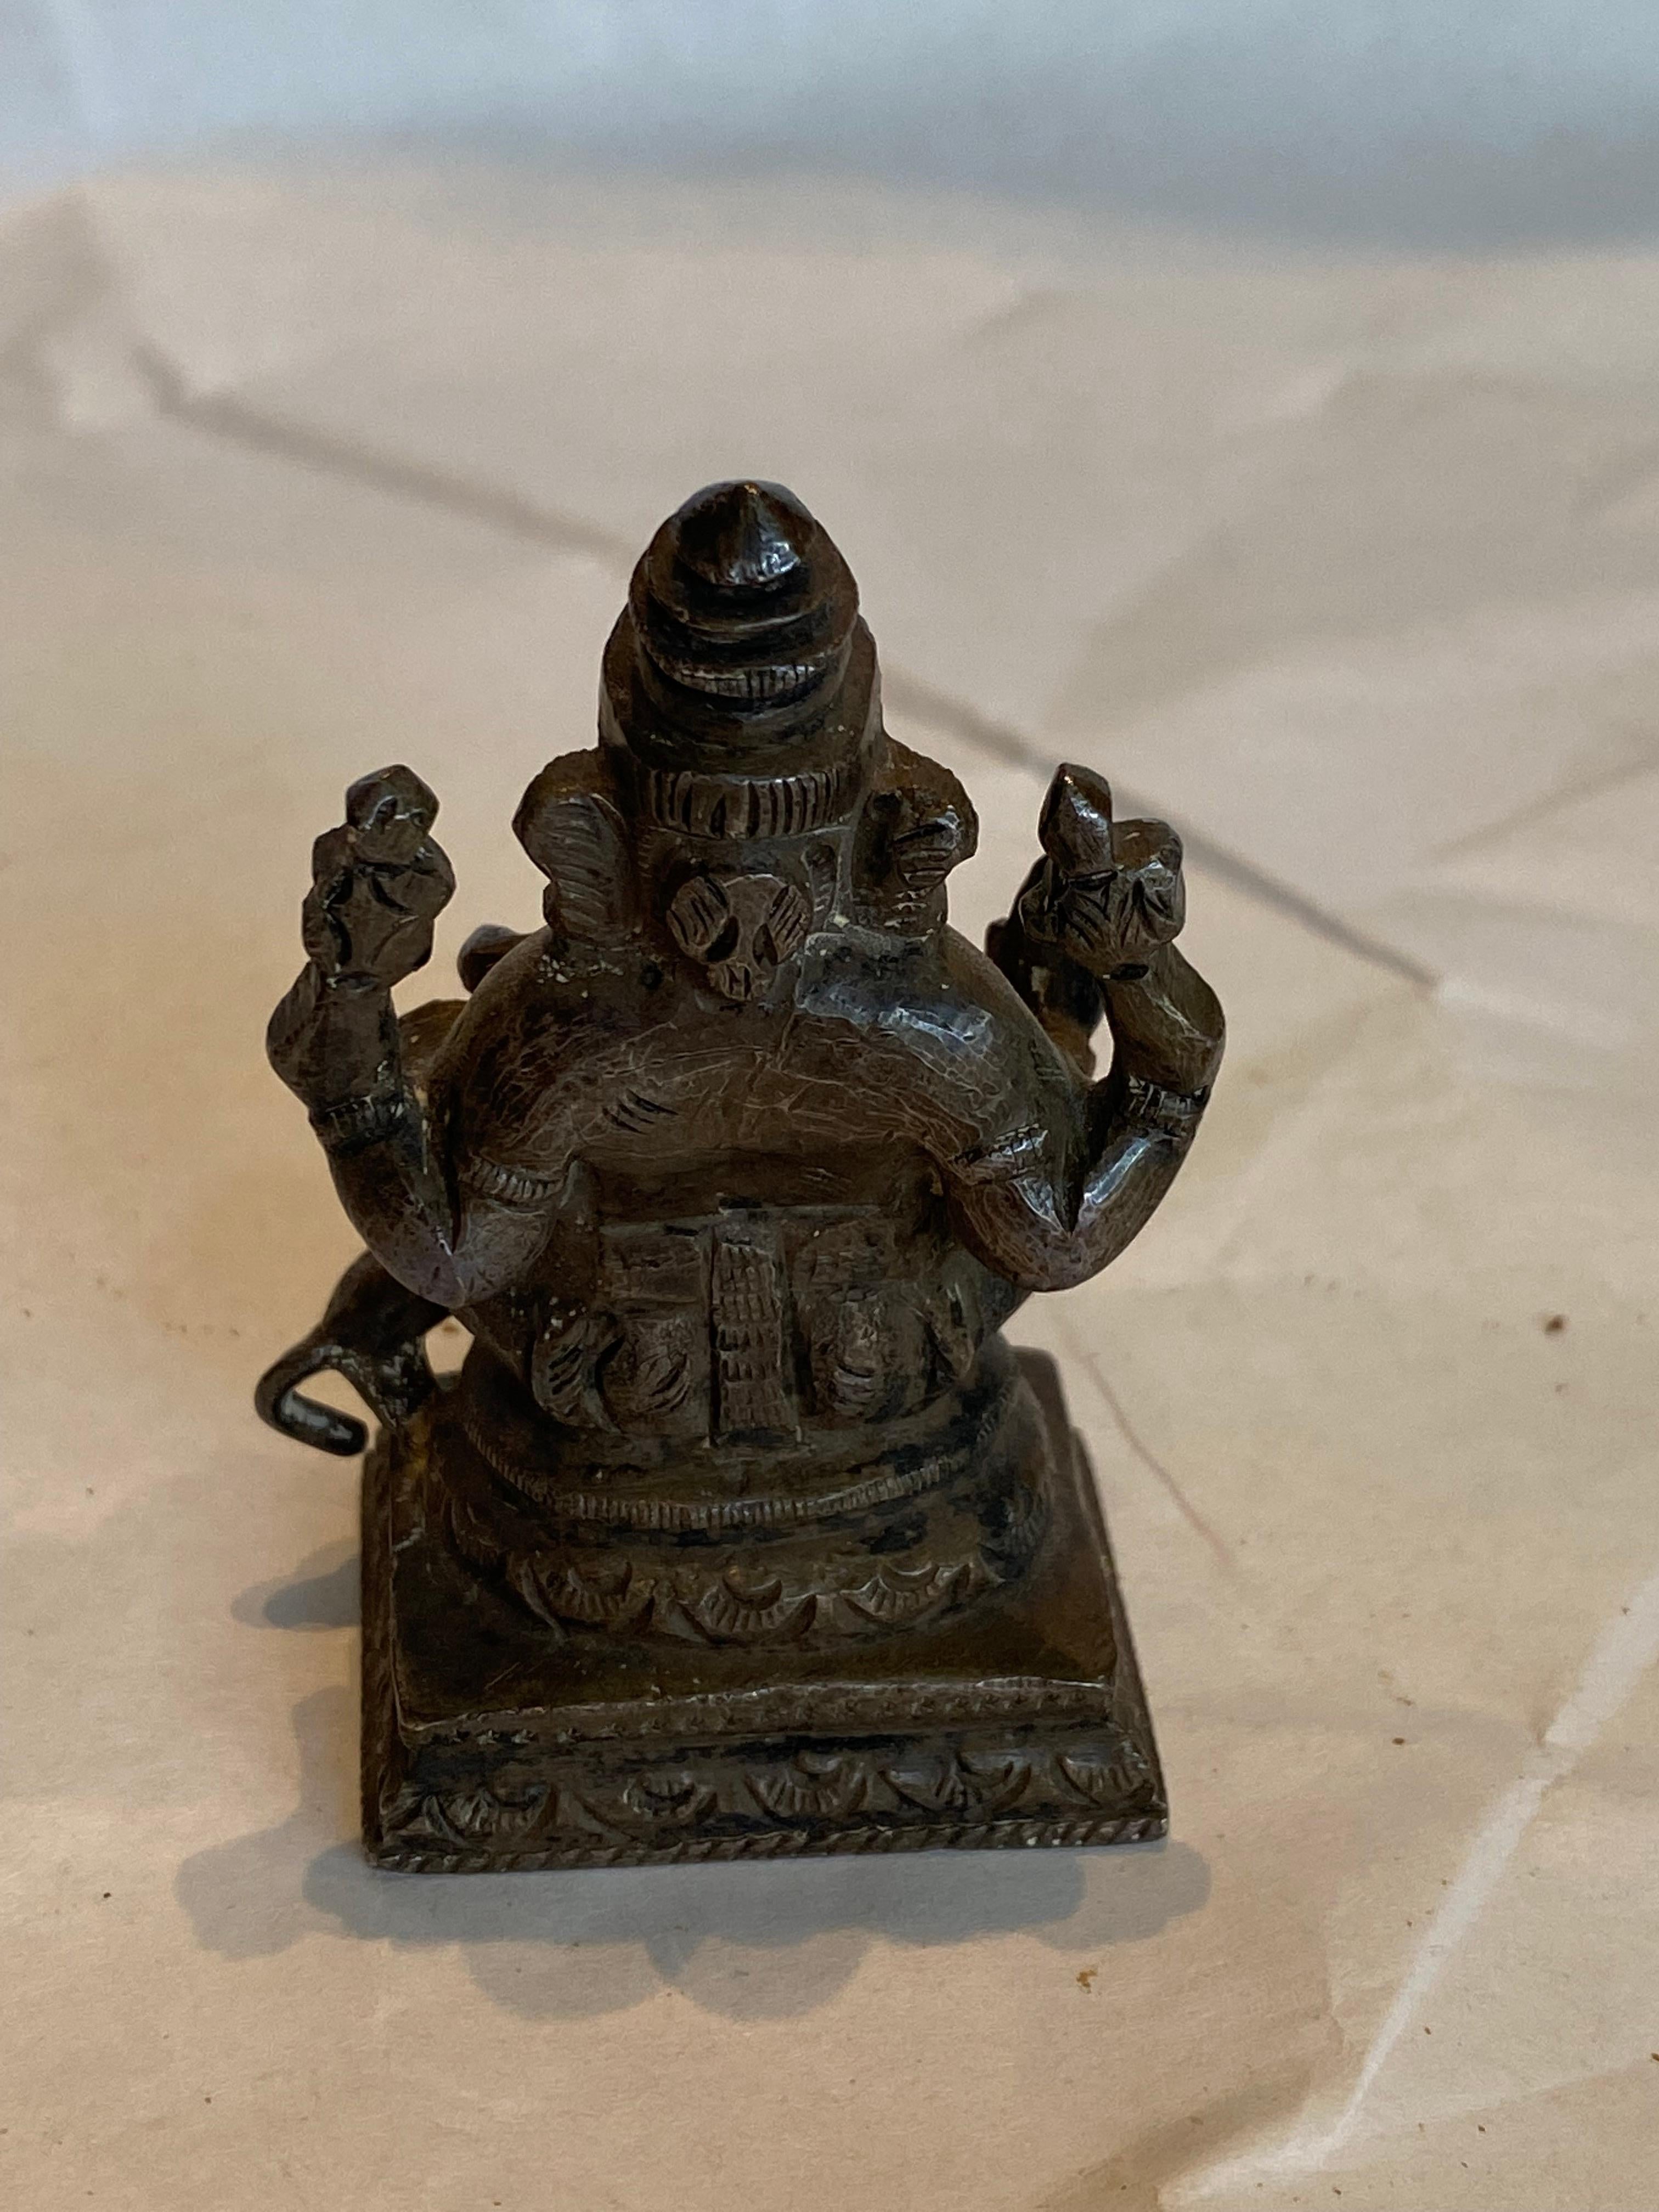 A wonderful keepsake of a bronze wax lost method of casting this Ganesha seated on a two step stand having a dog at its feet. The meaning of Ganesha this deity god is 